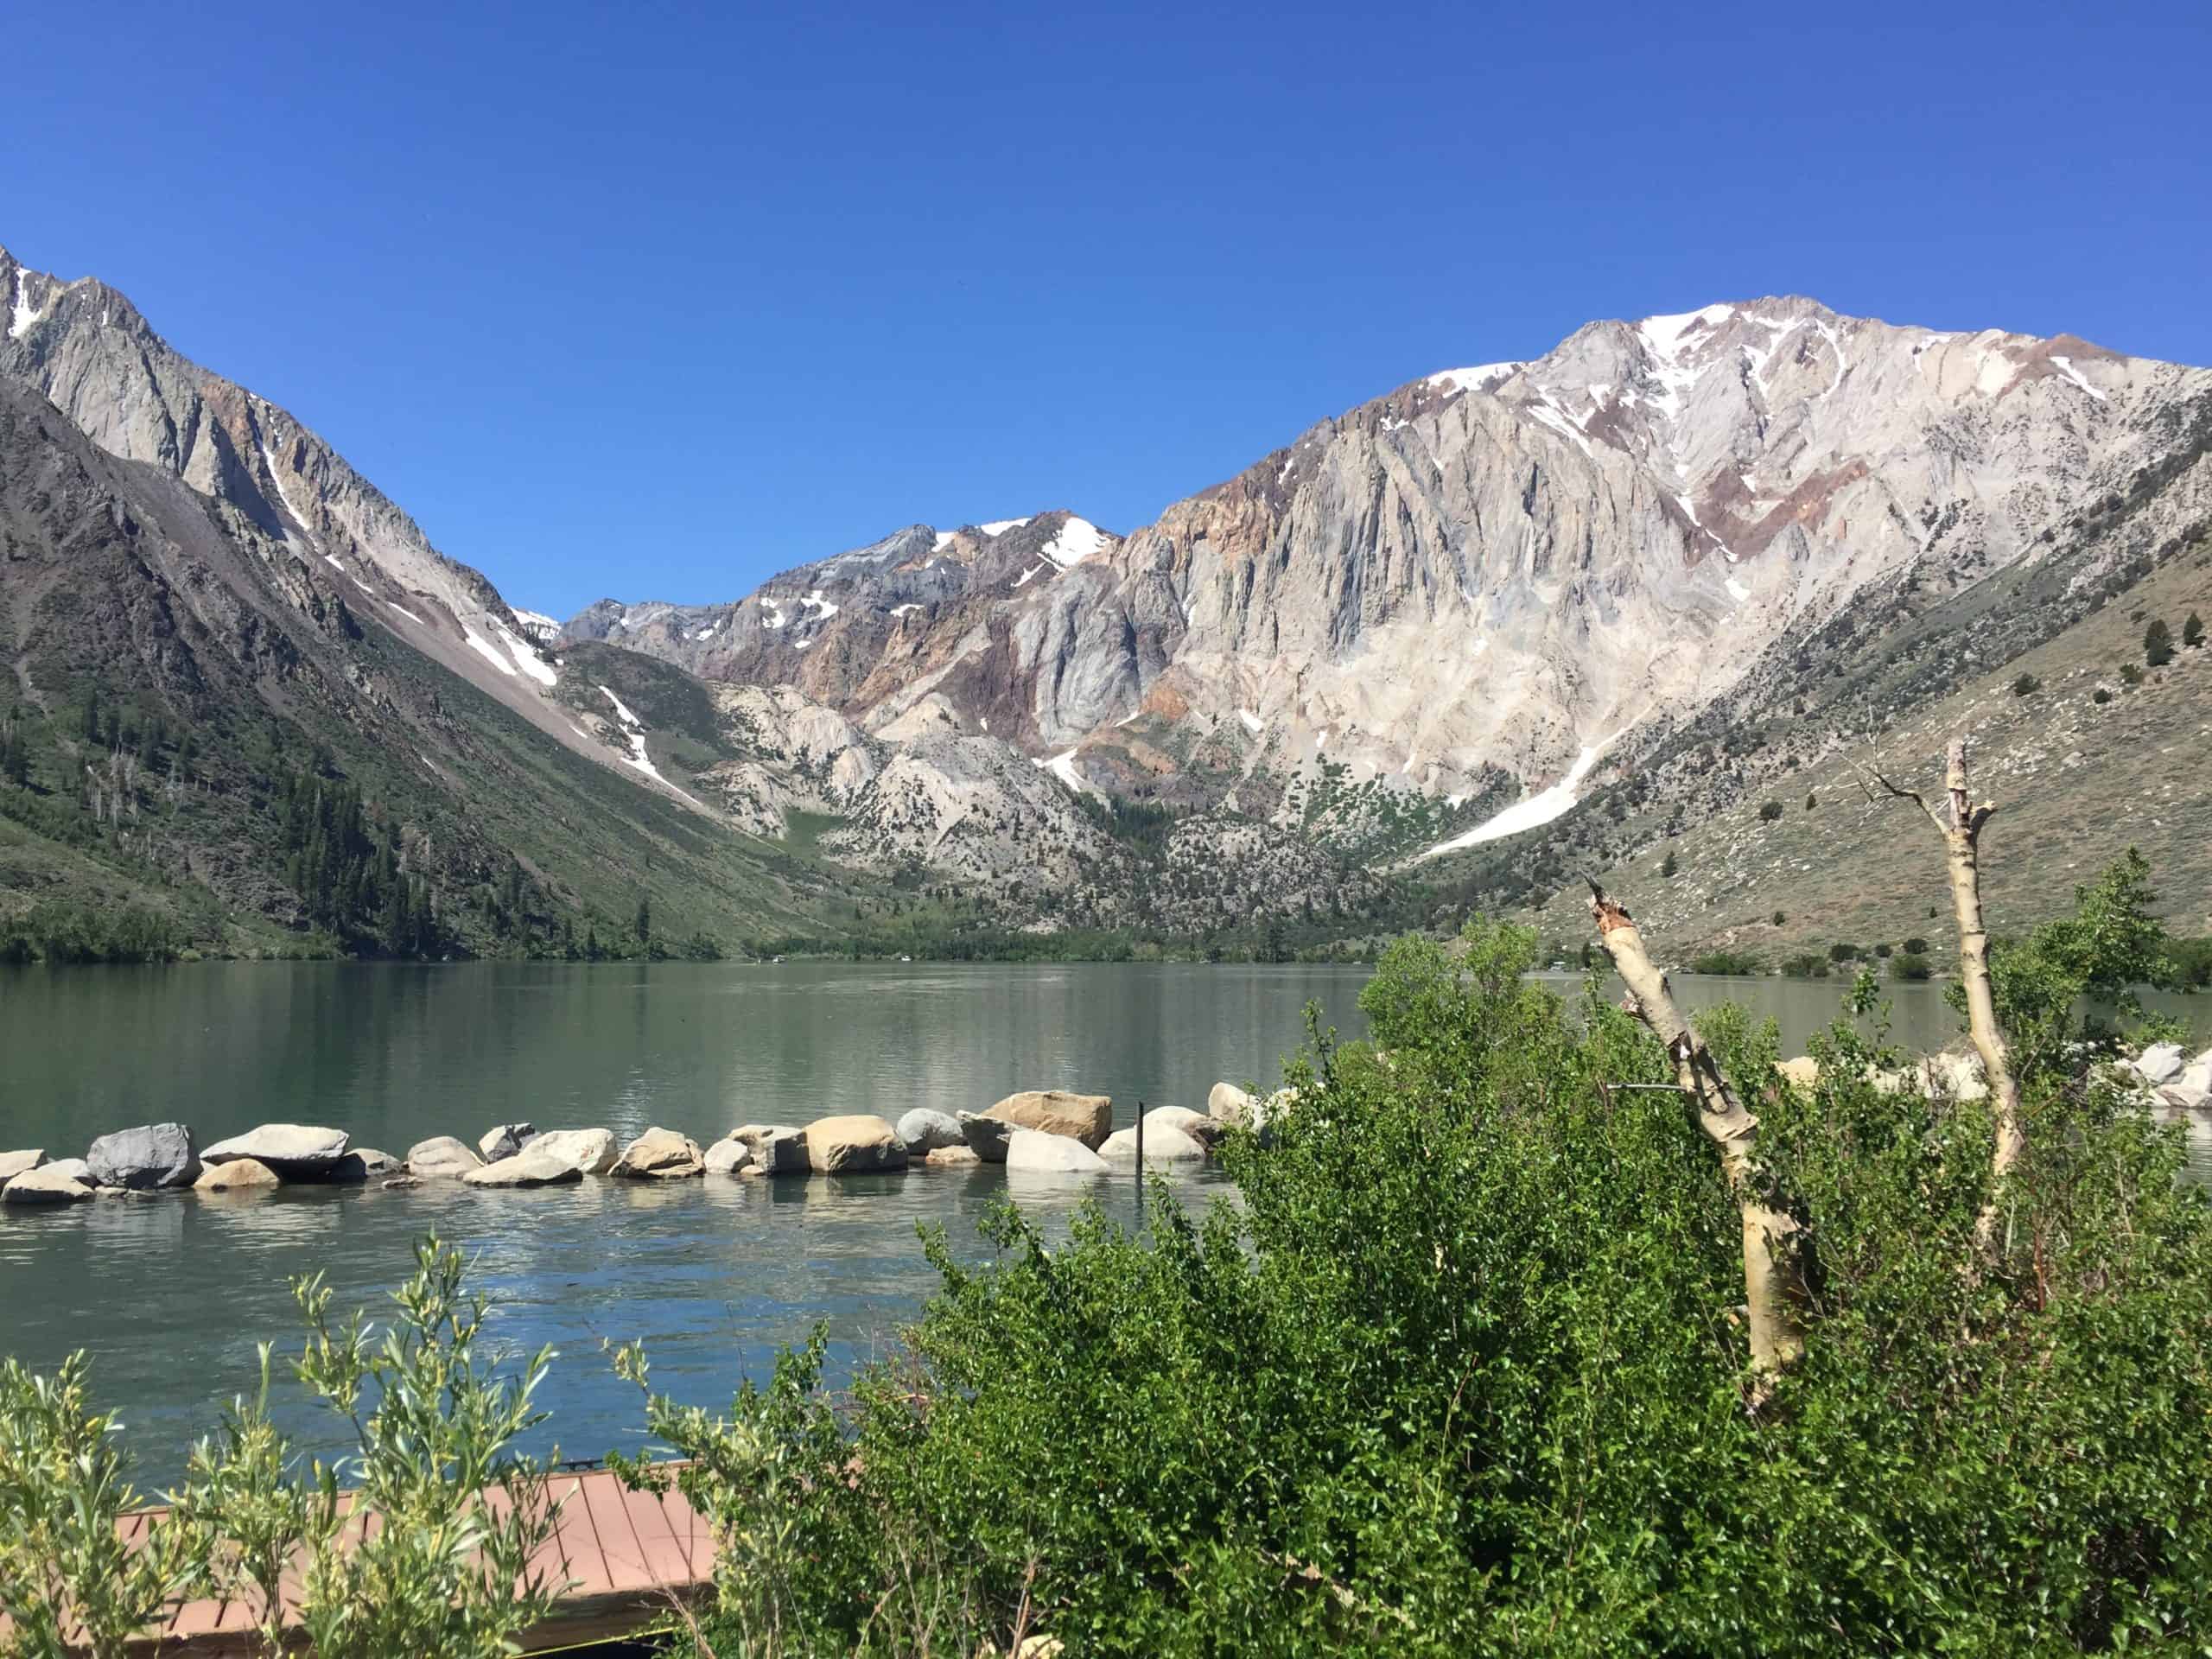 Best things to do in Mammoth Lakes California Paul Lanyi Convict Lake boat ramp